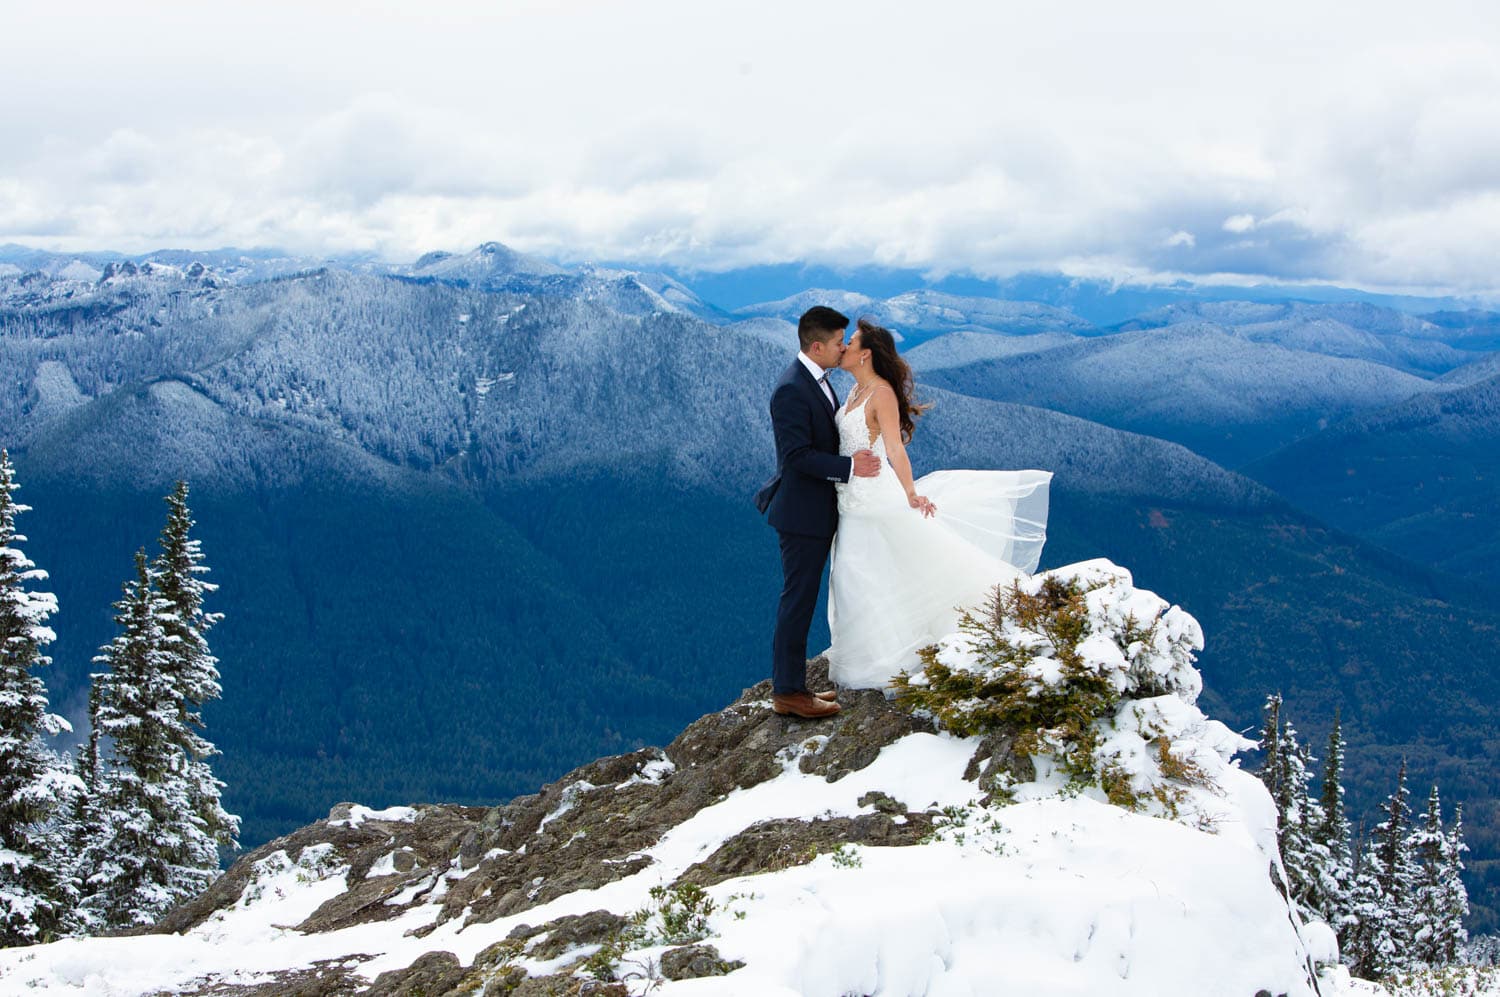 With the wind dramatically blowing the bride's hair and dress back behind her, the couple kiss on a rock promontory high in the mountains near Mt. Rainier with rolling snow-covered hills behind them and puffy clouds filling the sky.